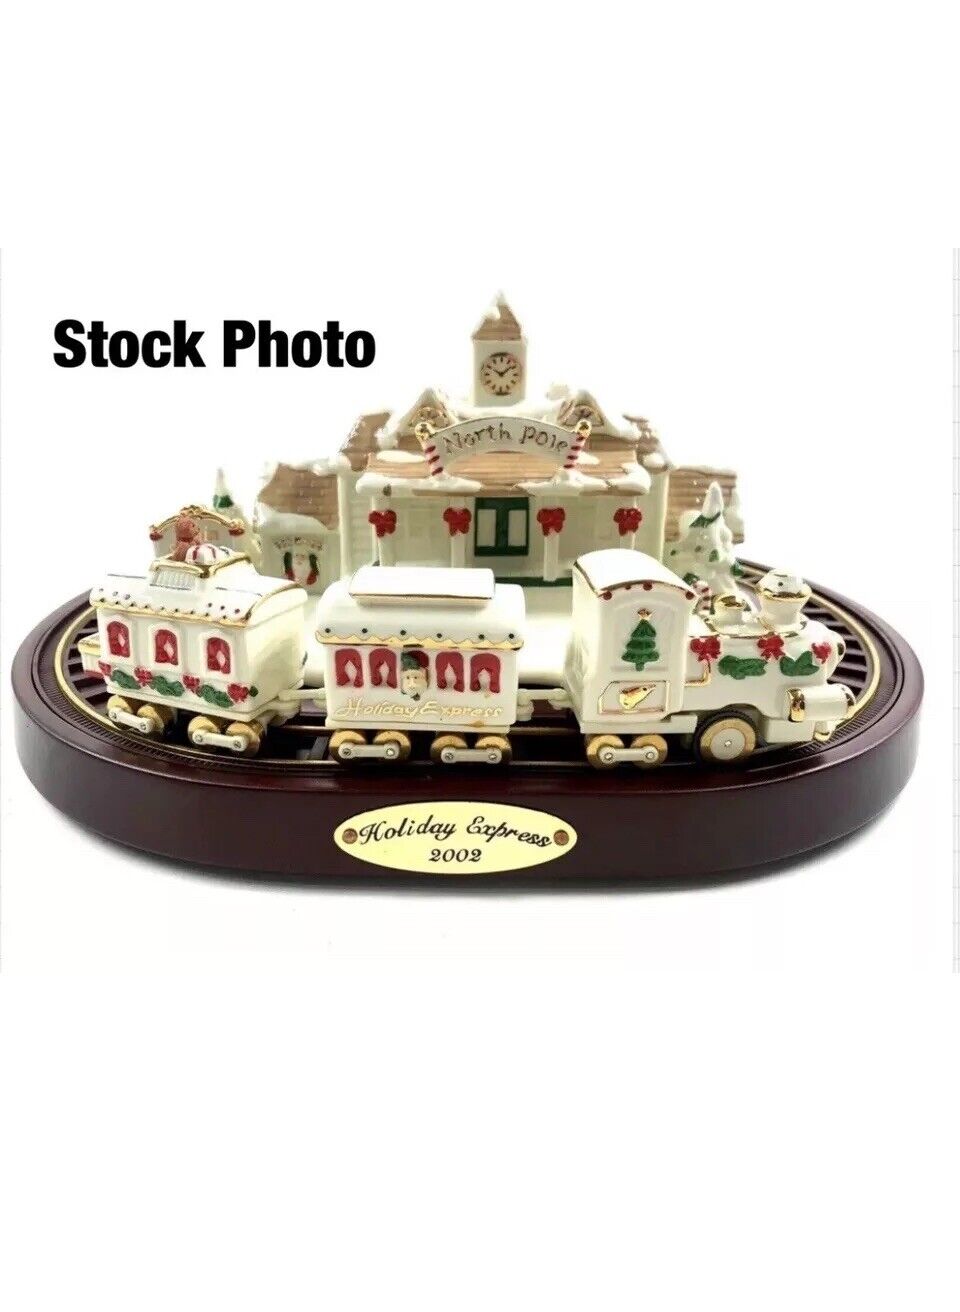 New 2002 Avon Holiday Express Porcelain Christmas Moving Train & Cars